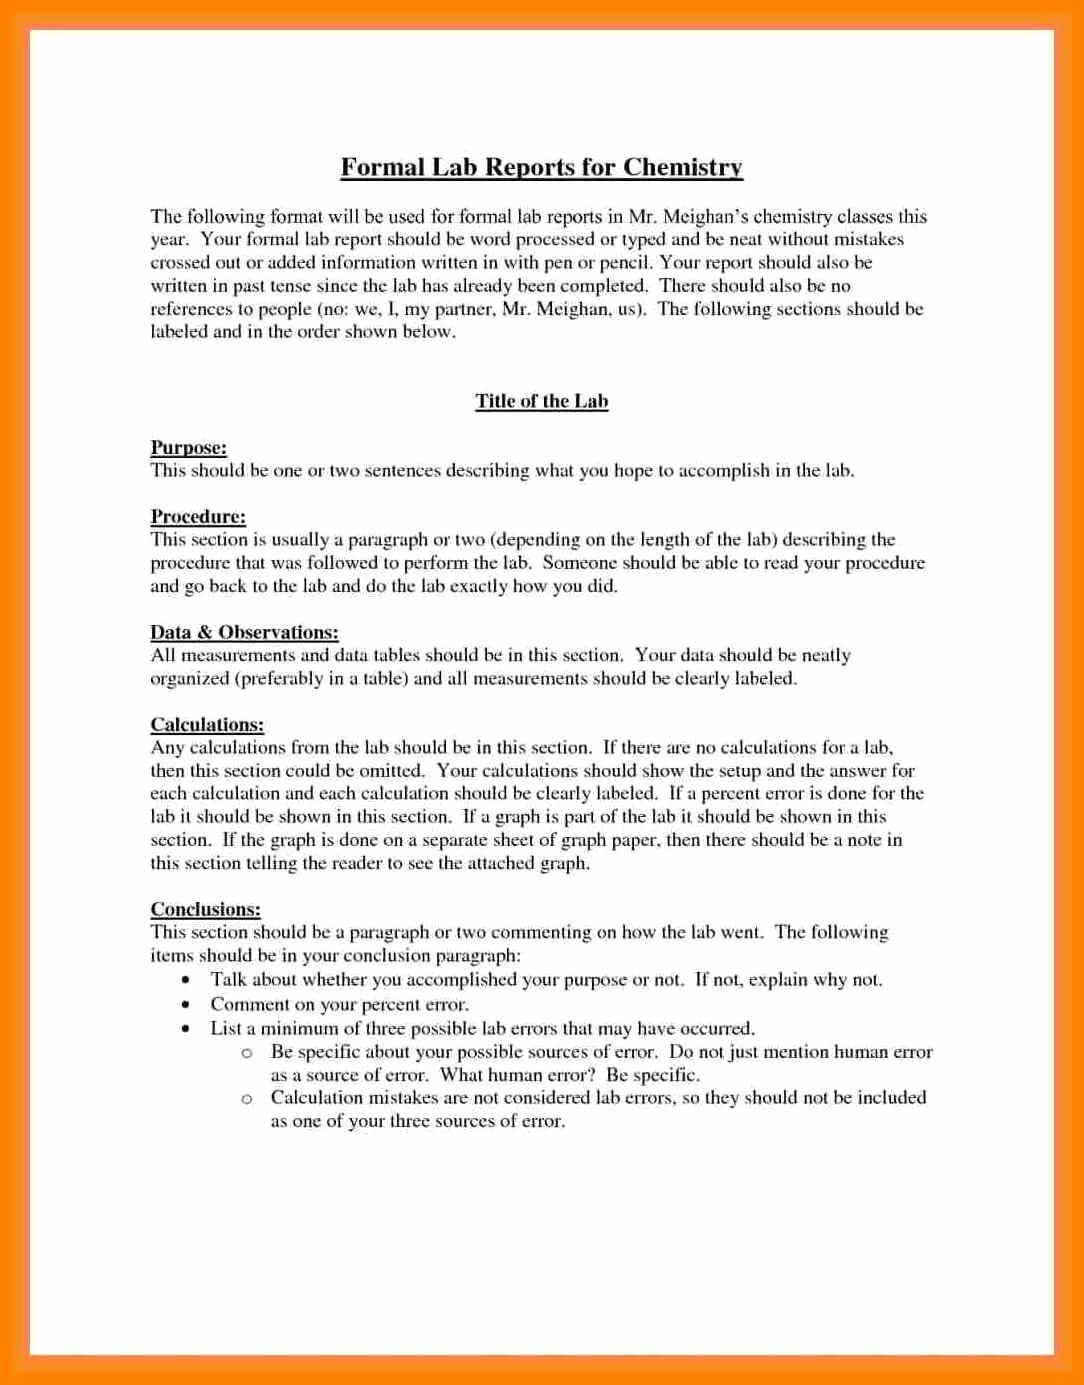 003 Formal Lab Report Example Best Write Up Template Of Regarding Biology Lab Report Template